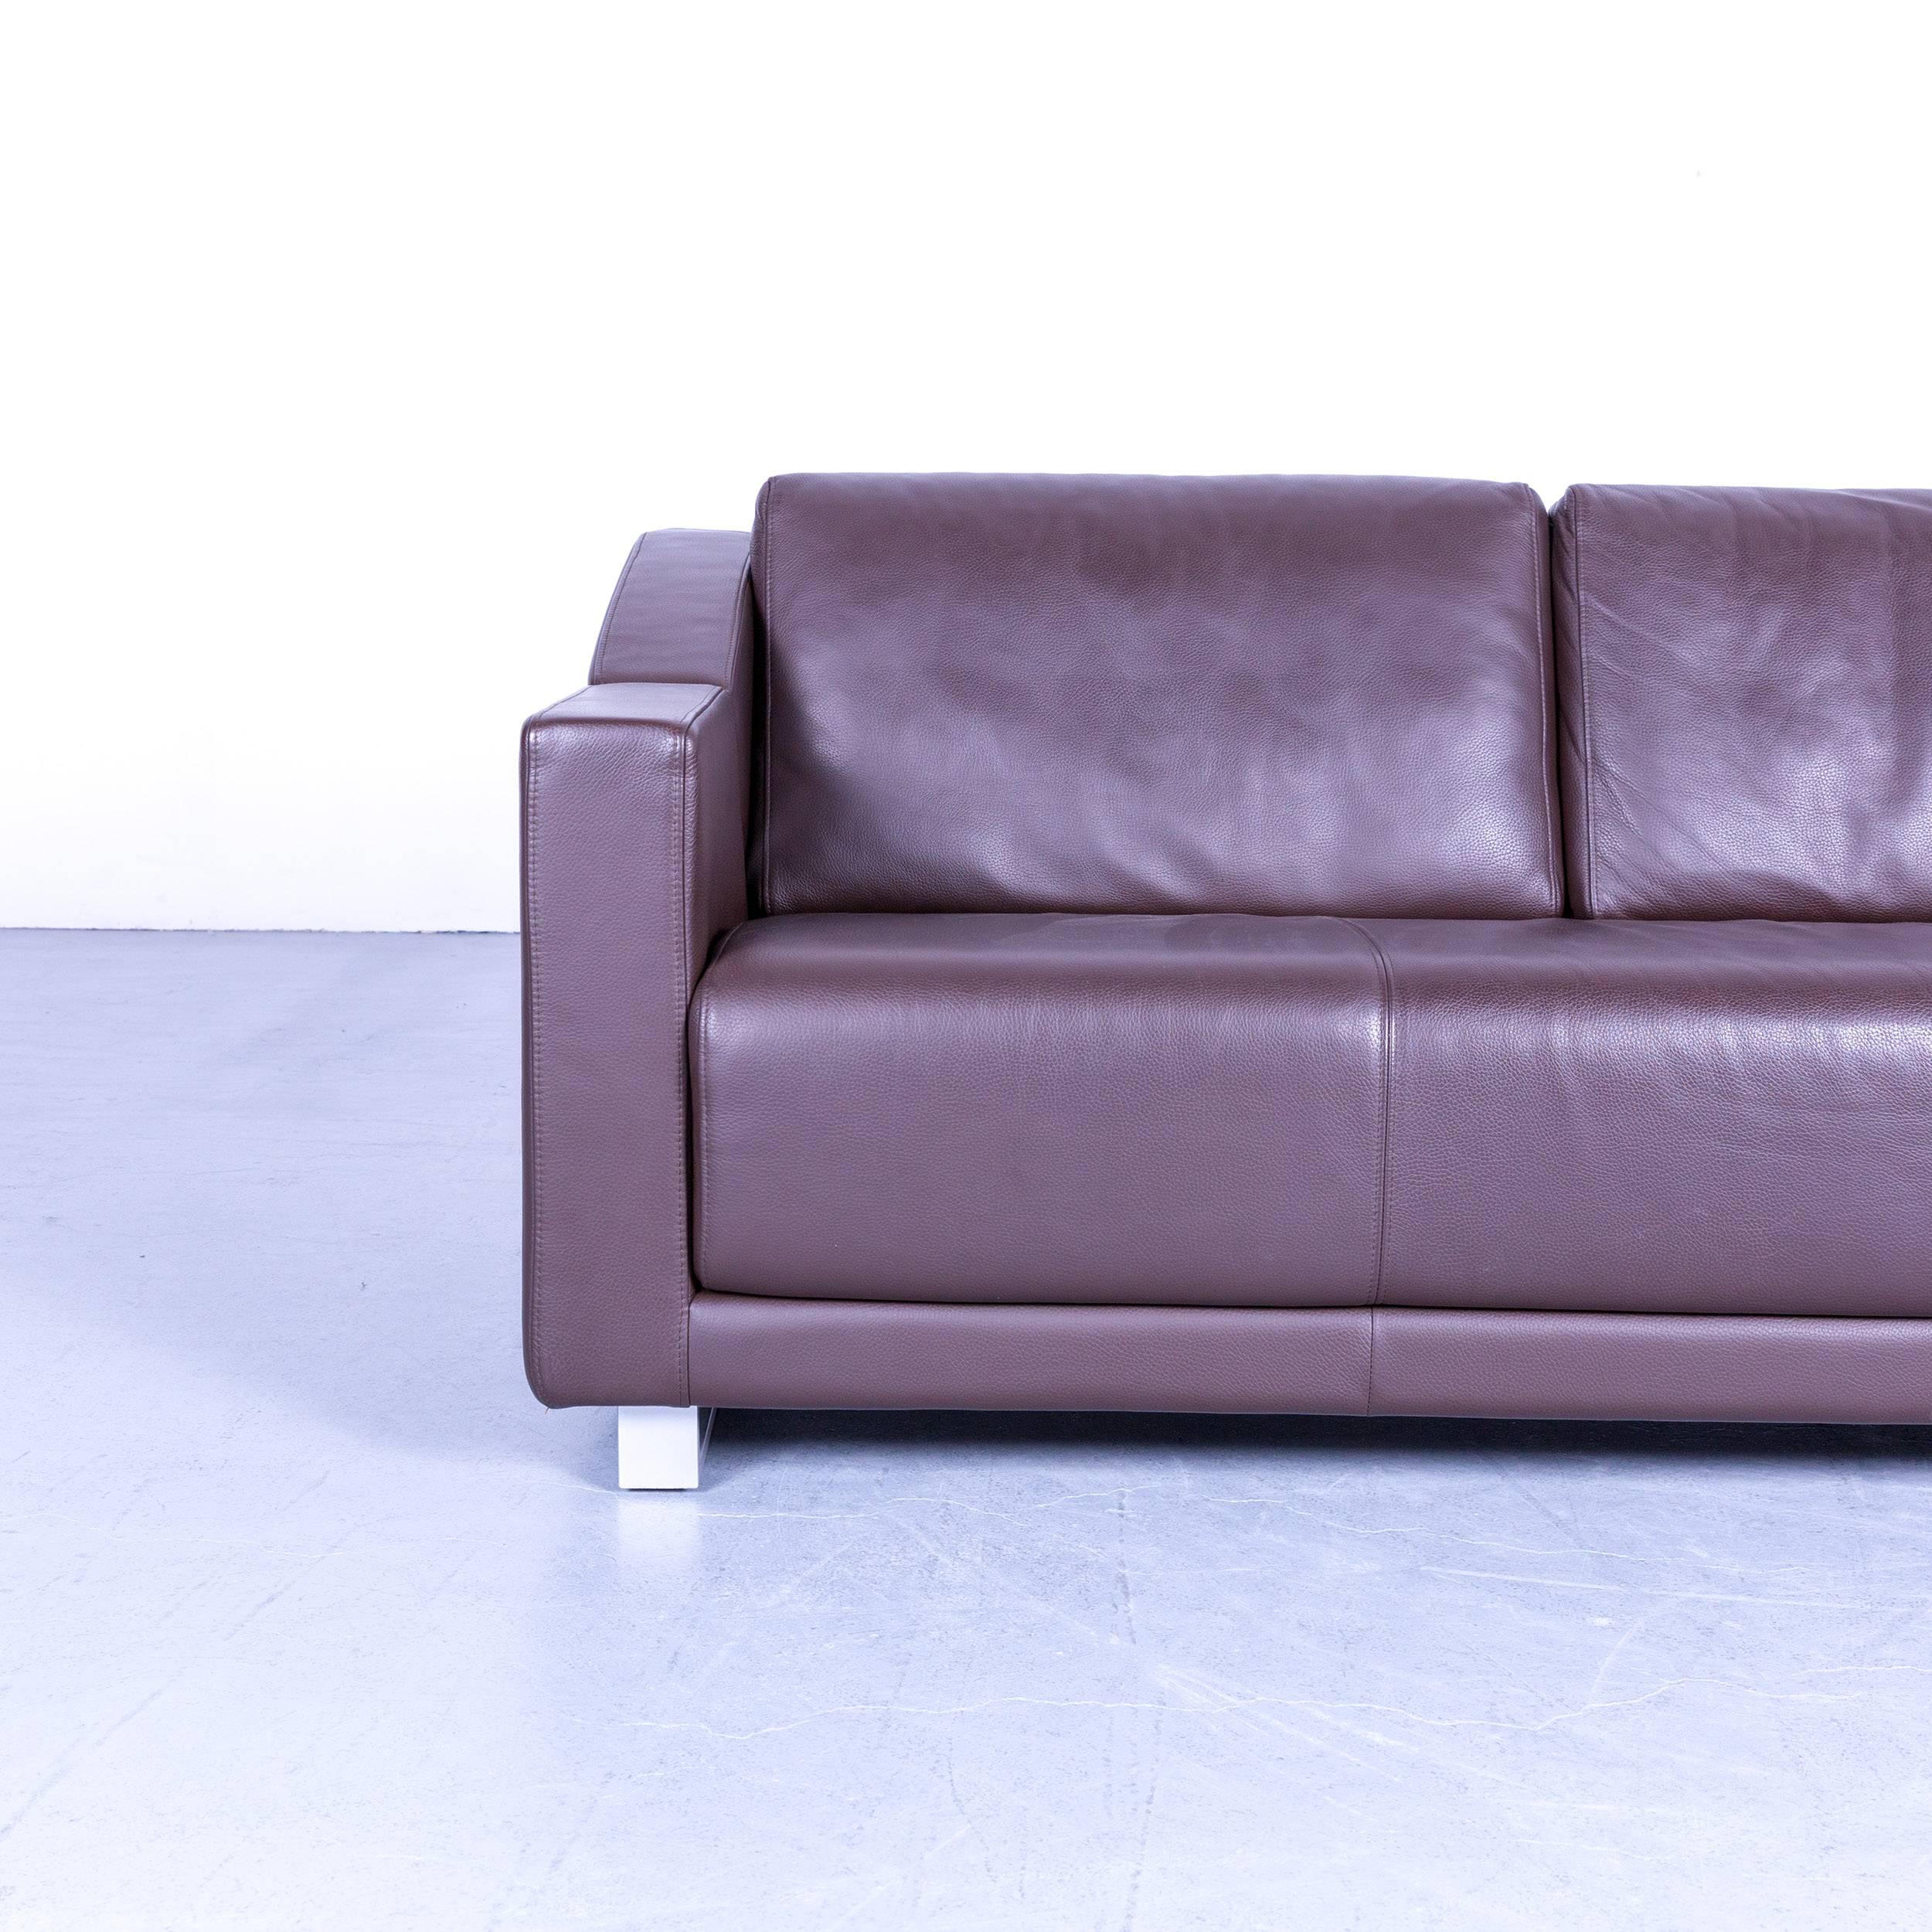 Modern Rolf Benz 350 Designer Sofa Broen Two-Seat Leather Couch For Sale